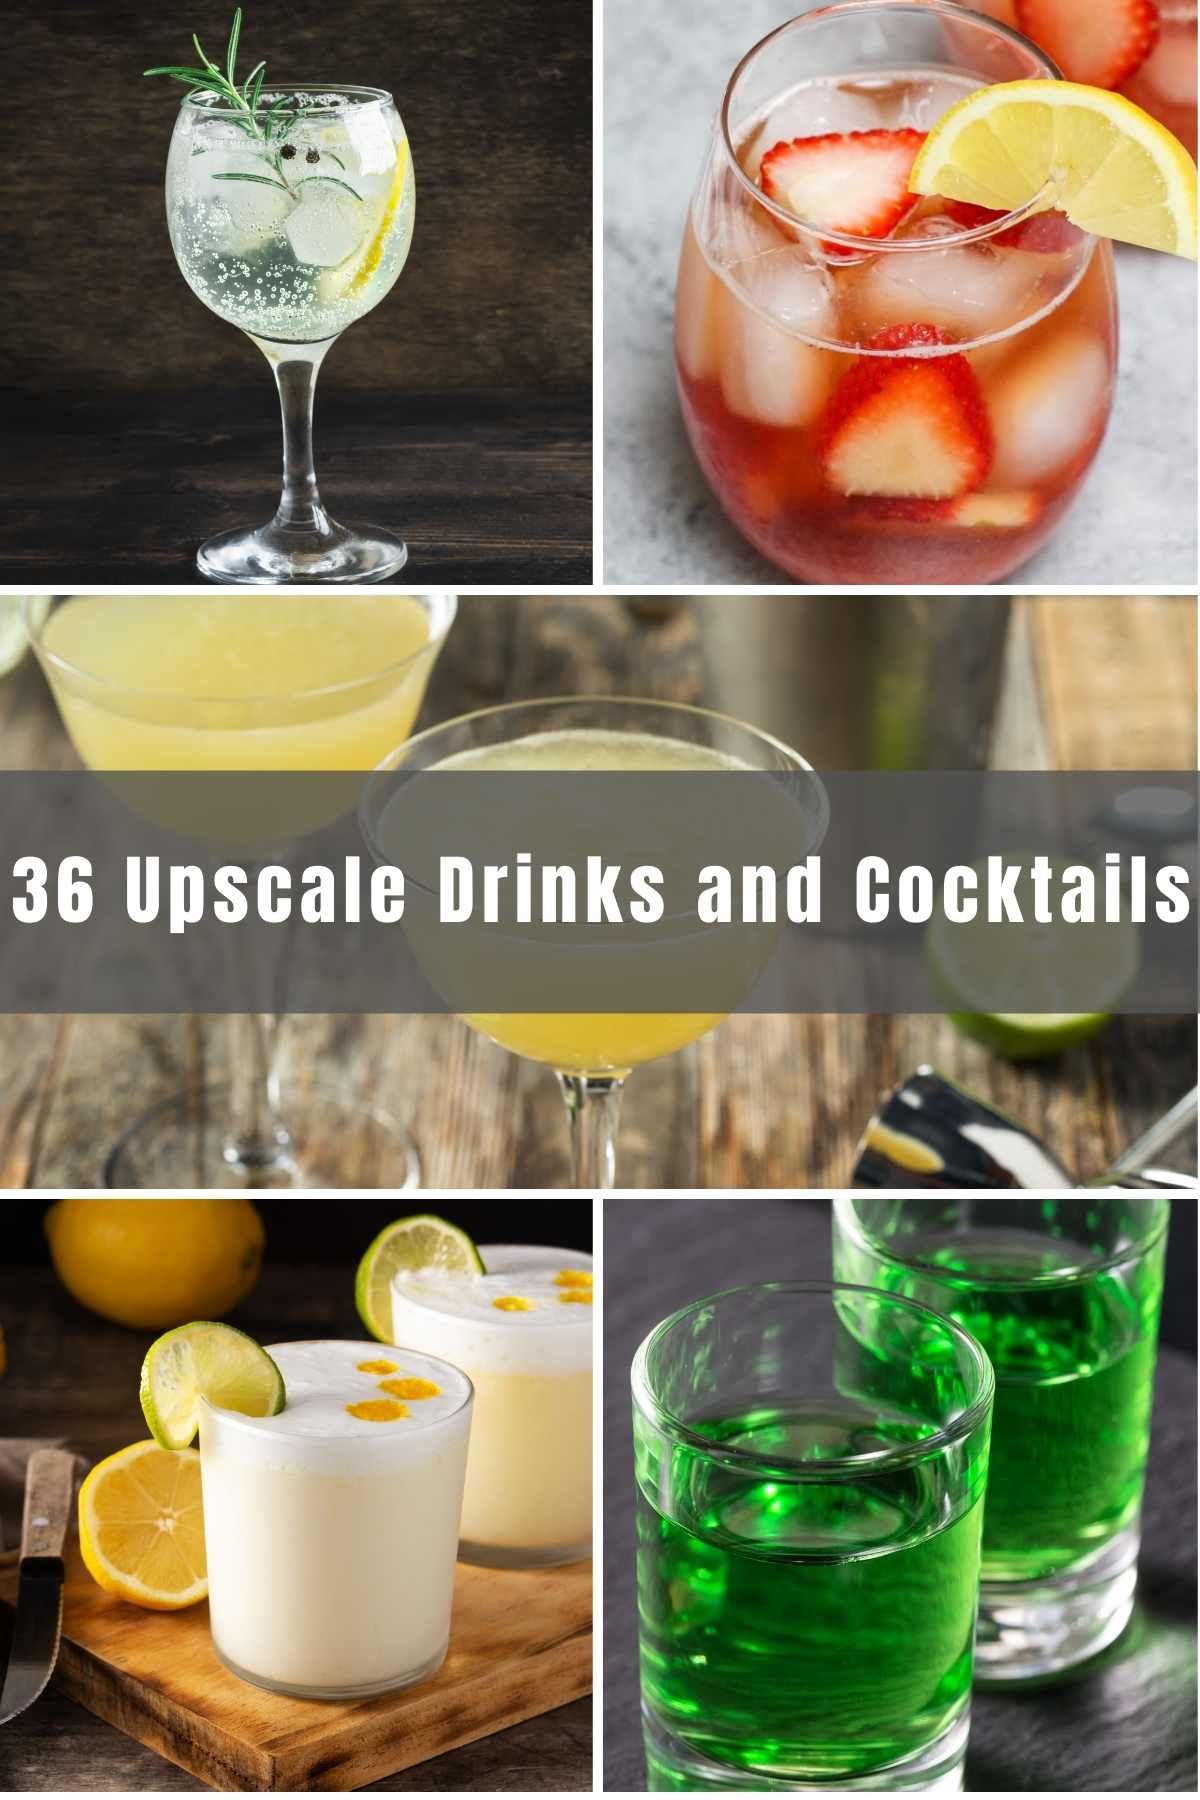 If you’re hosting an upscale get-together or brunch, the rum and simple drinks will not do. Reach for the top shelf and impress your guests with these sophisticated and fancy Upscale Cocktails.